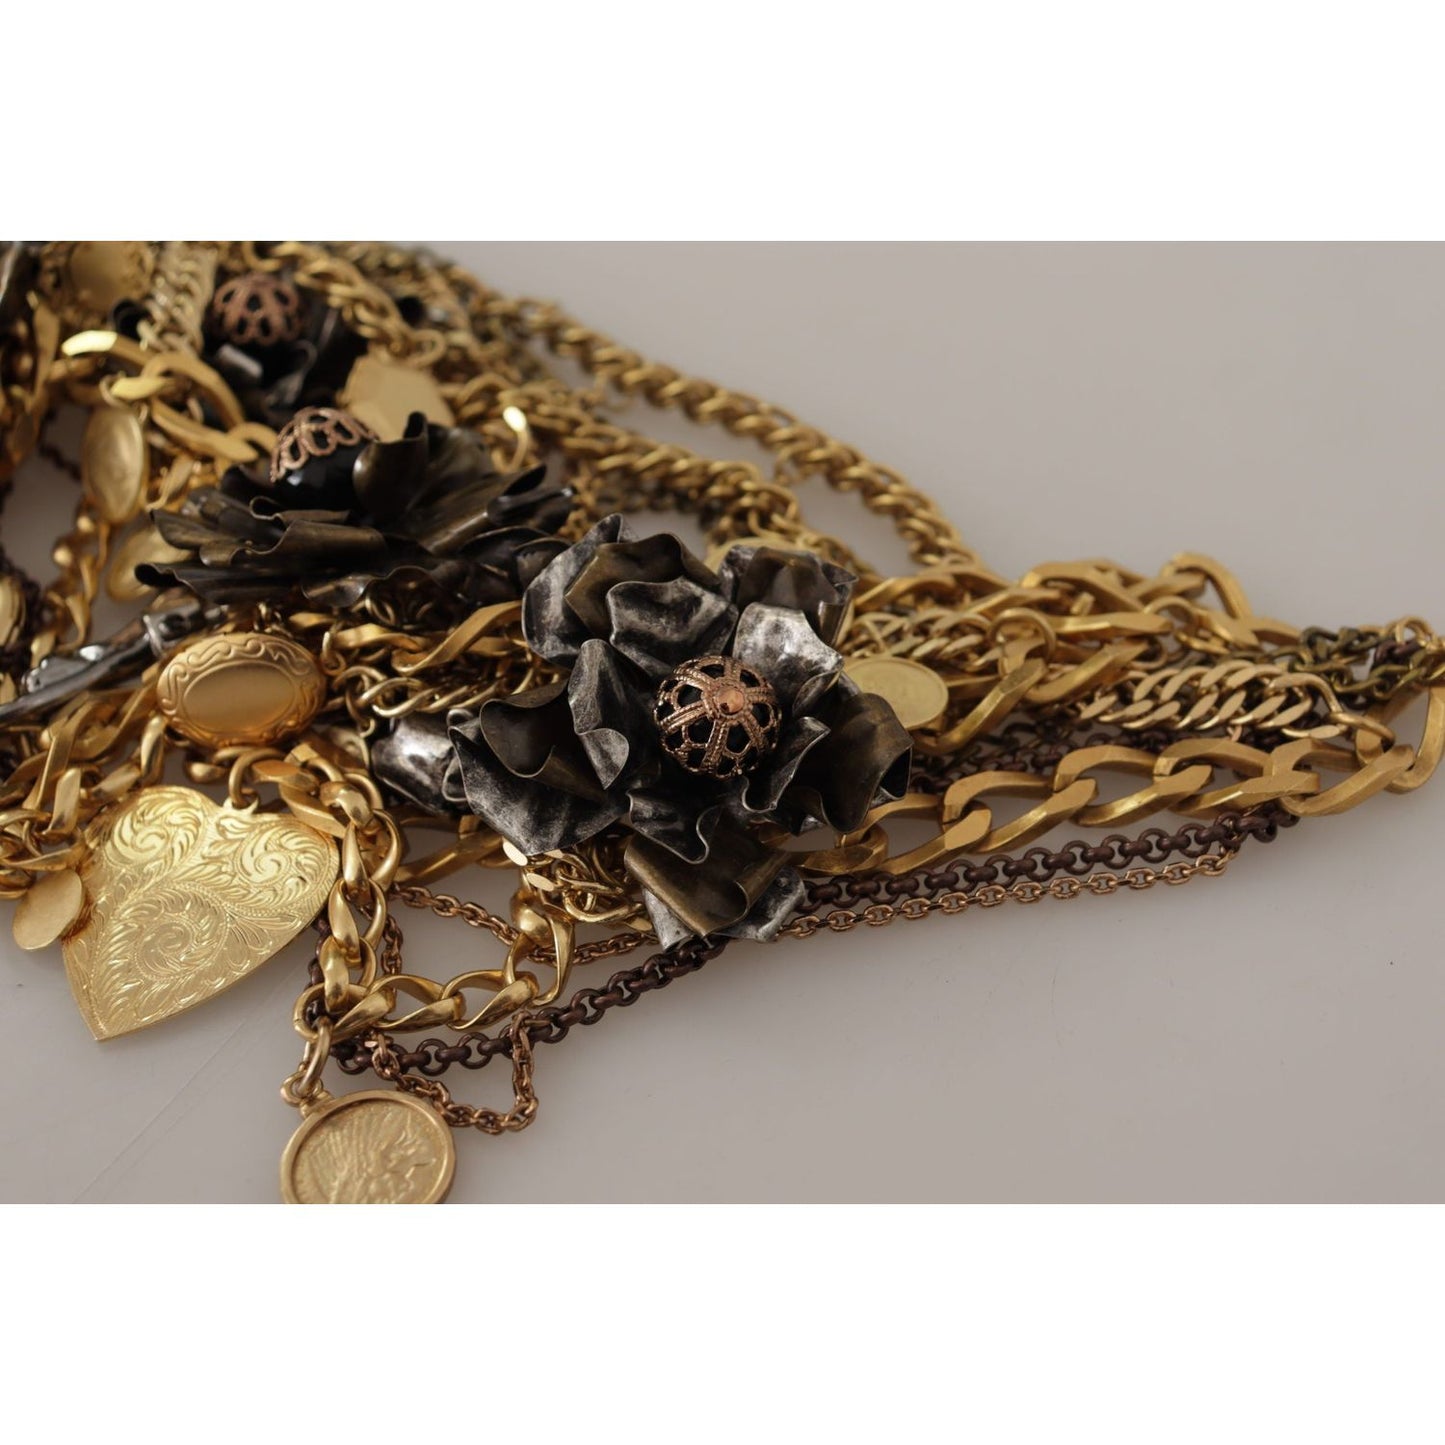 Dolce & Gabbana Sicilian Glamour Gold Statement Necklace gold-brass-sicily-charm-heart-statement-necklace WOMAN NECKLACE IMG_3833-scaled-b8627c61-96e.jpg